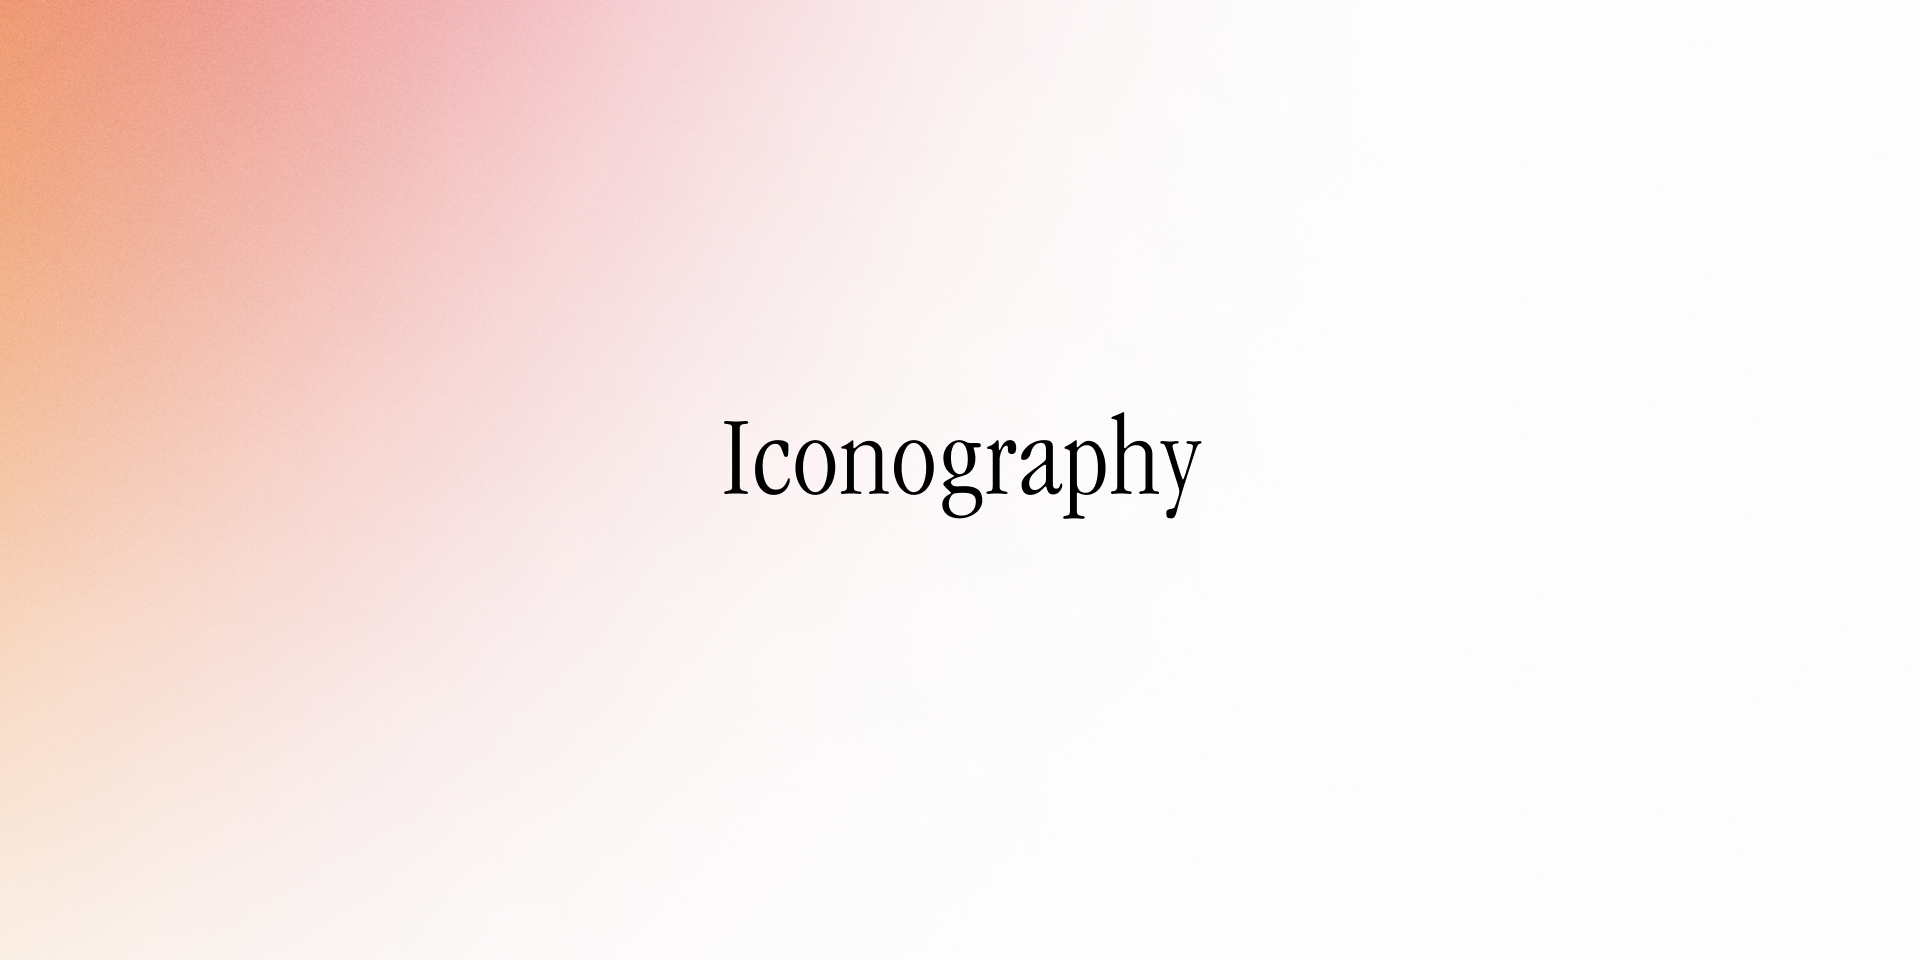 Title-iconography